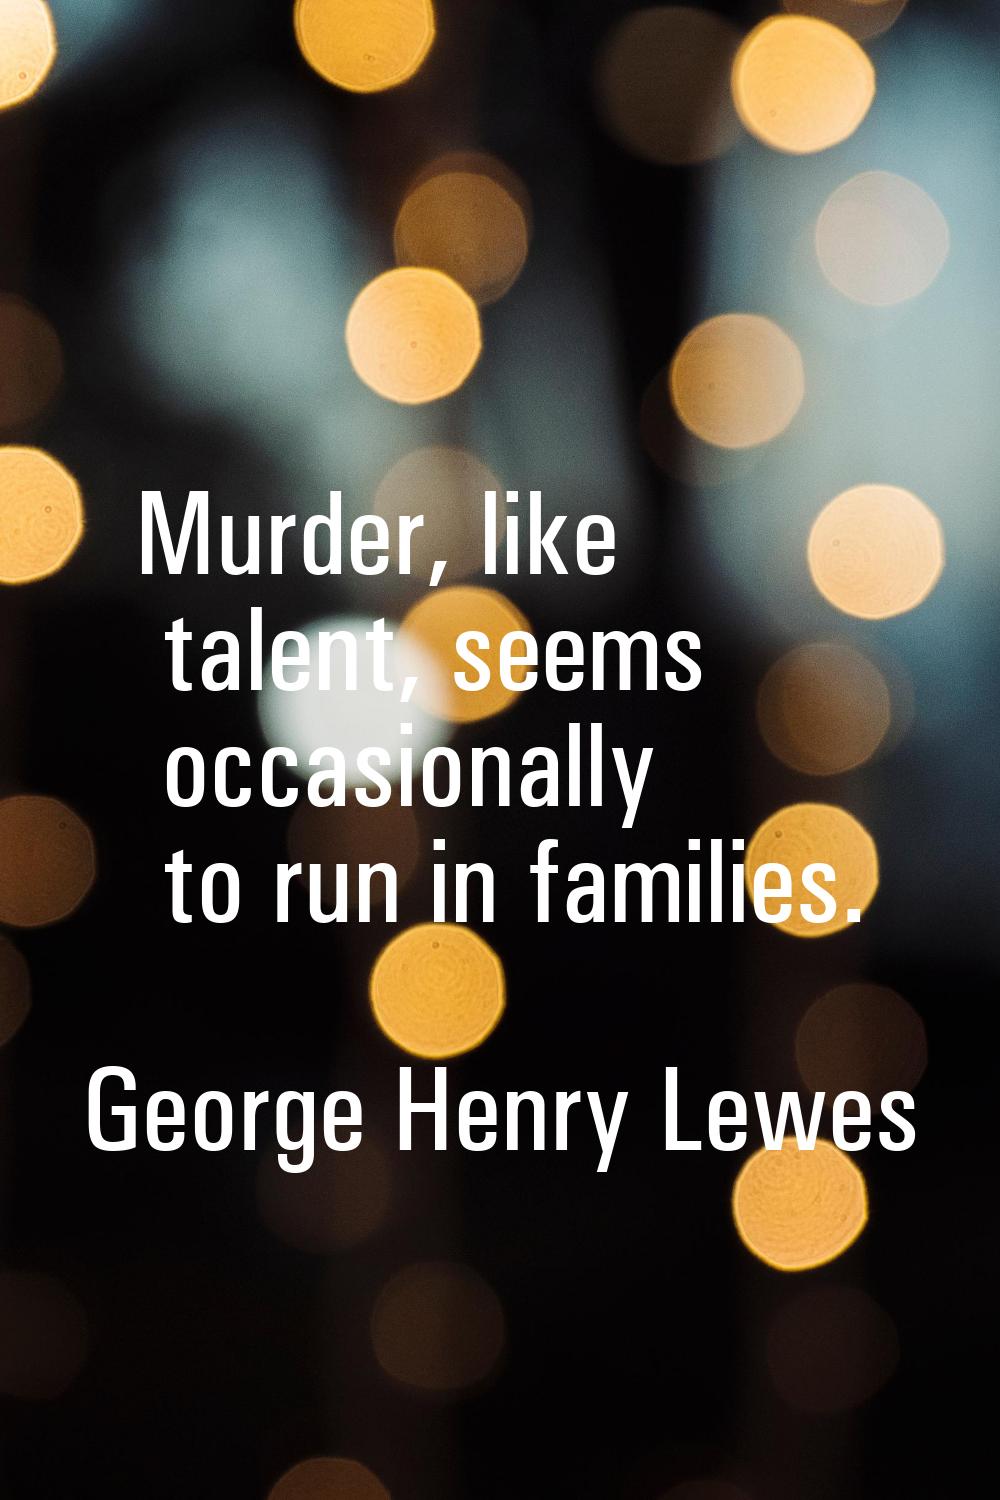 Murder, like talent, seems occasionally to run in families.